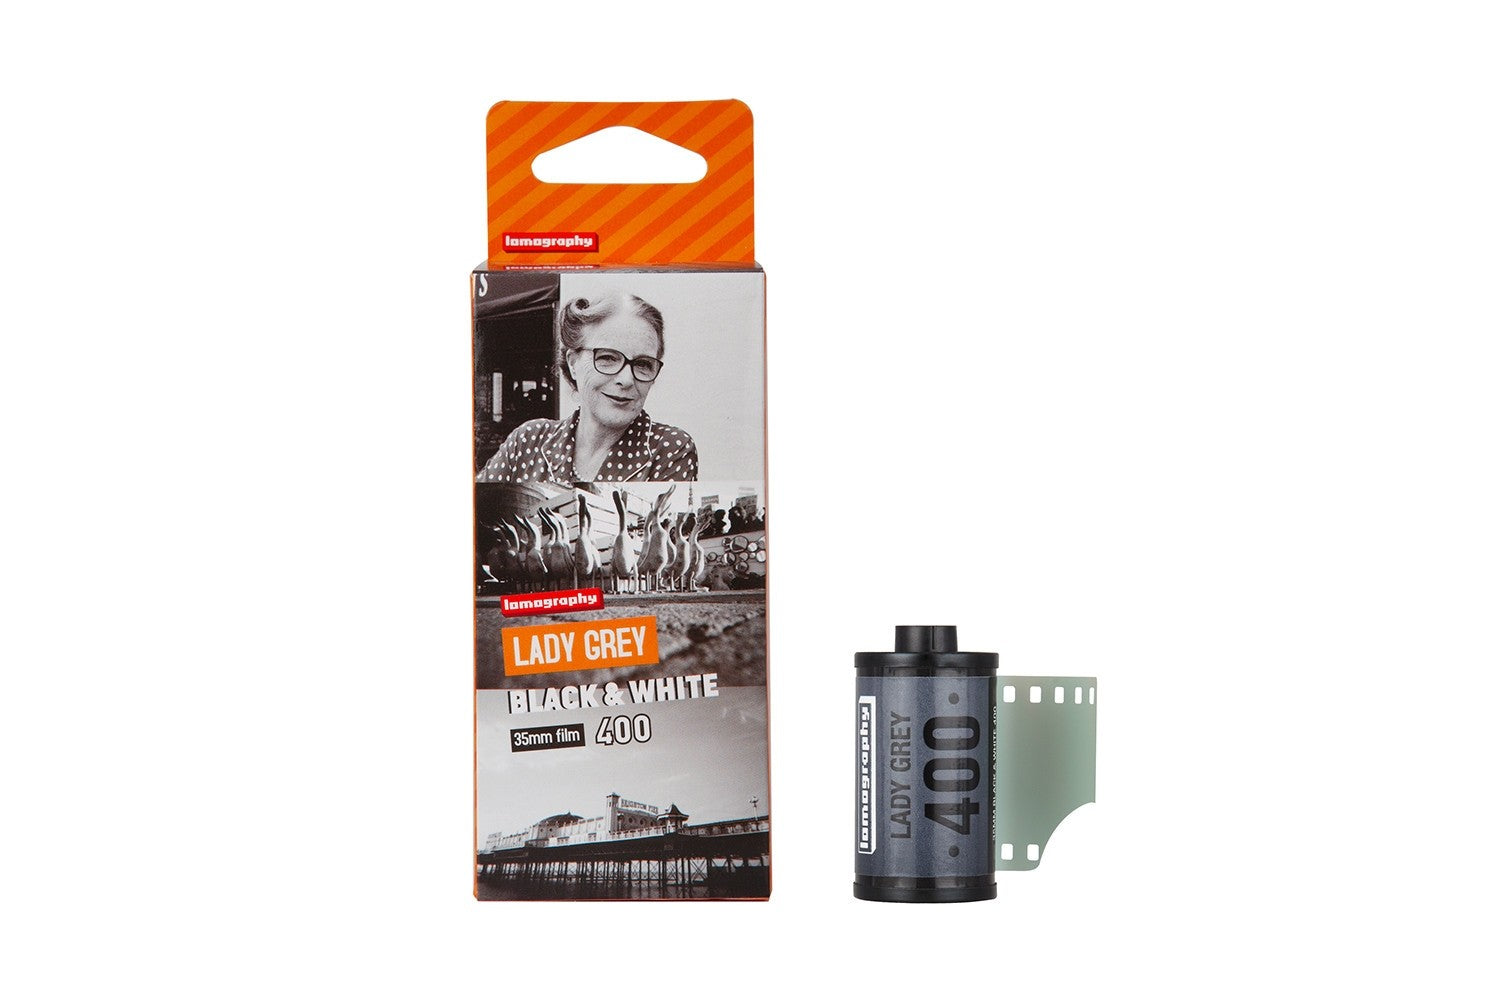 Product Image of Lomography B&W Lady Grey 135 Film ISO 400 (3 pack)